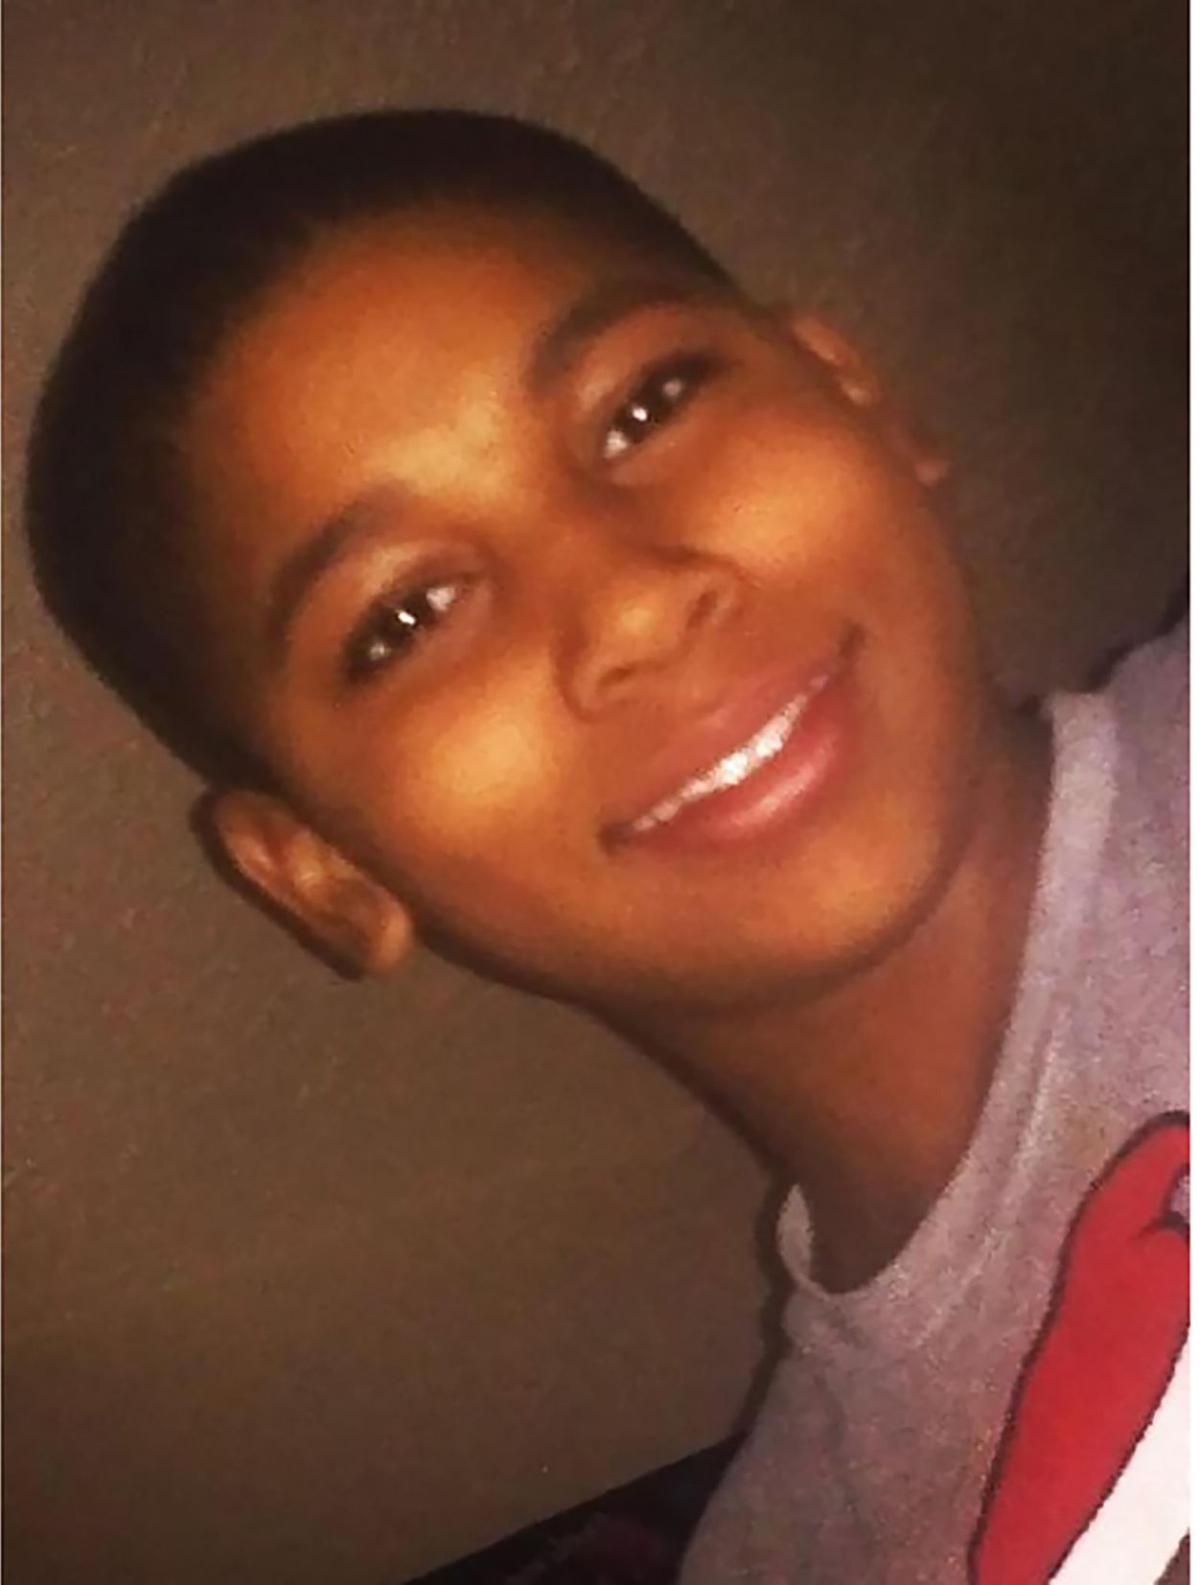 Tamir Rice shooting probe: 1 officer fired, 1 suspended | Local News